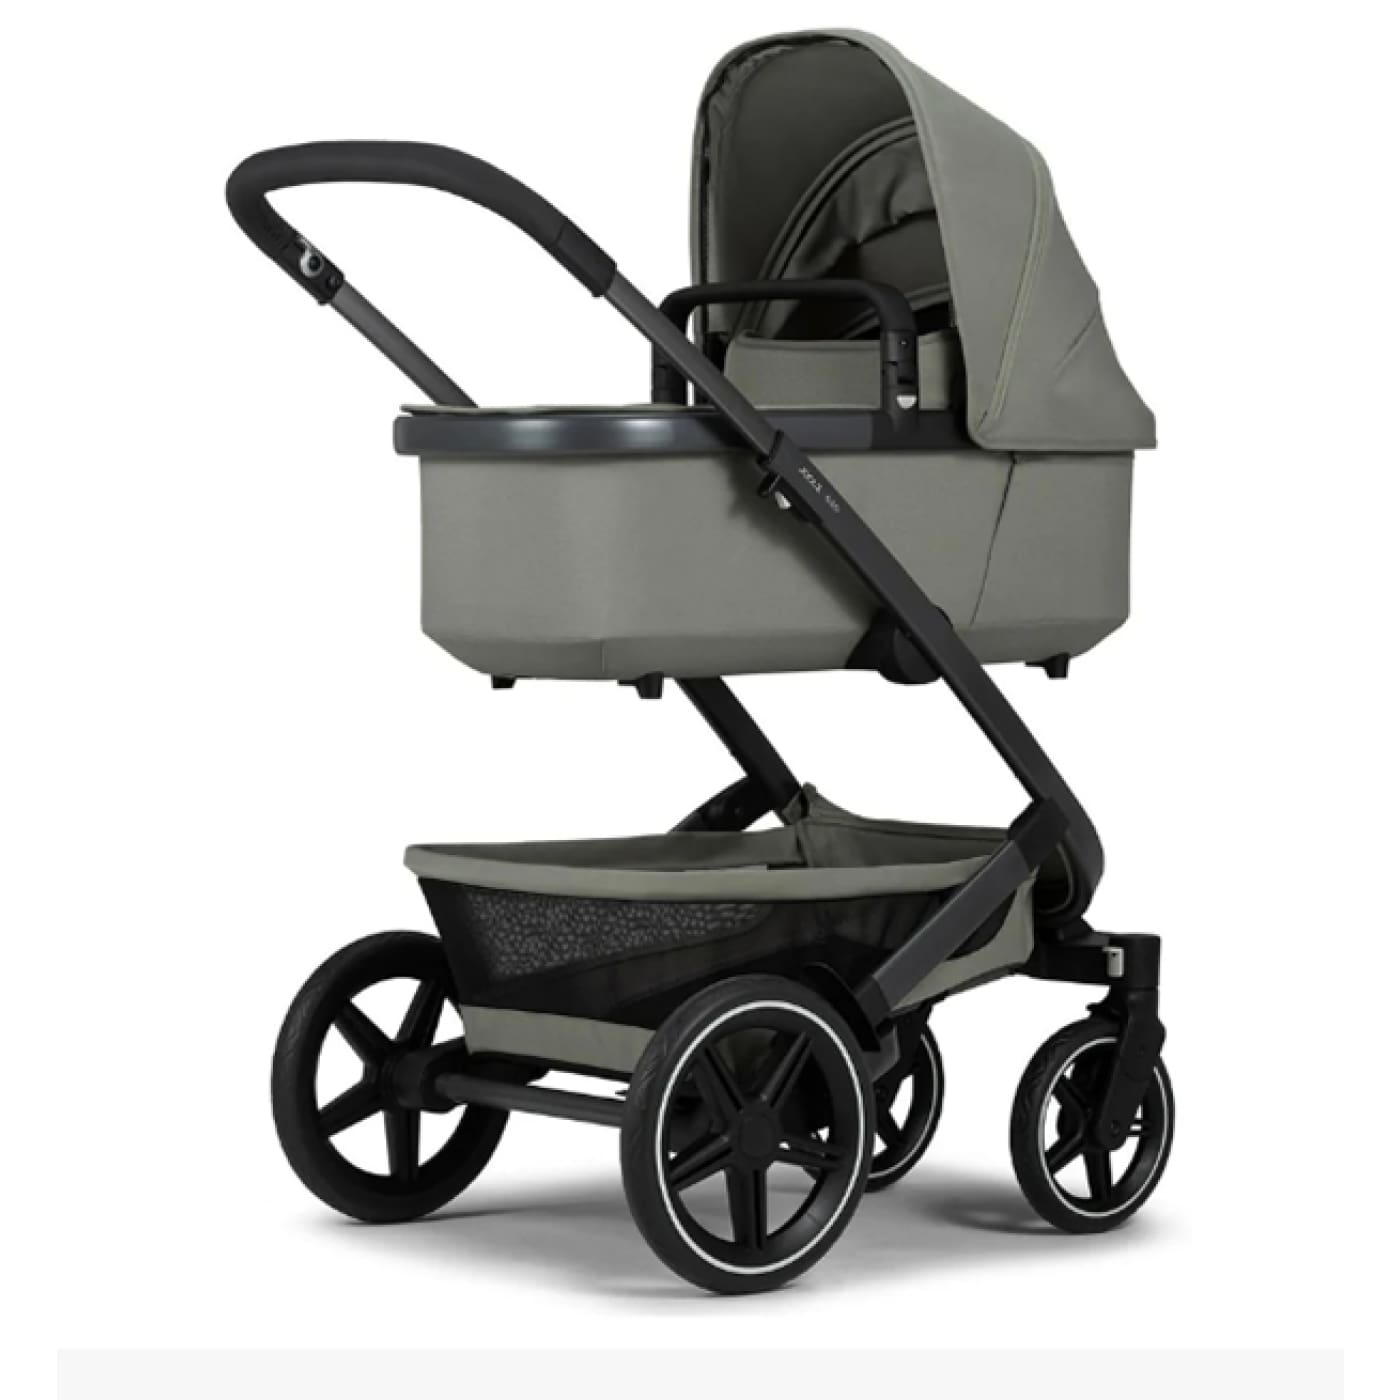 Joolz Geo3 Carry Cot - Sage Green - PRAMS & STROLLERS - BASS/CARRY COTS/STANDS